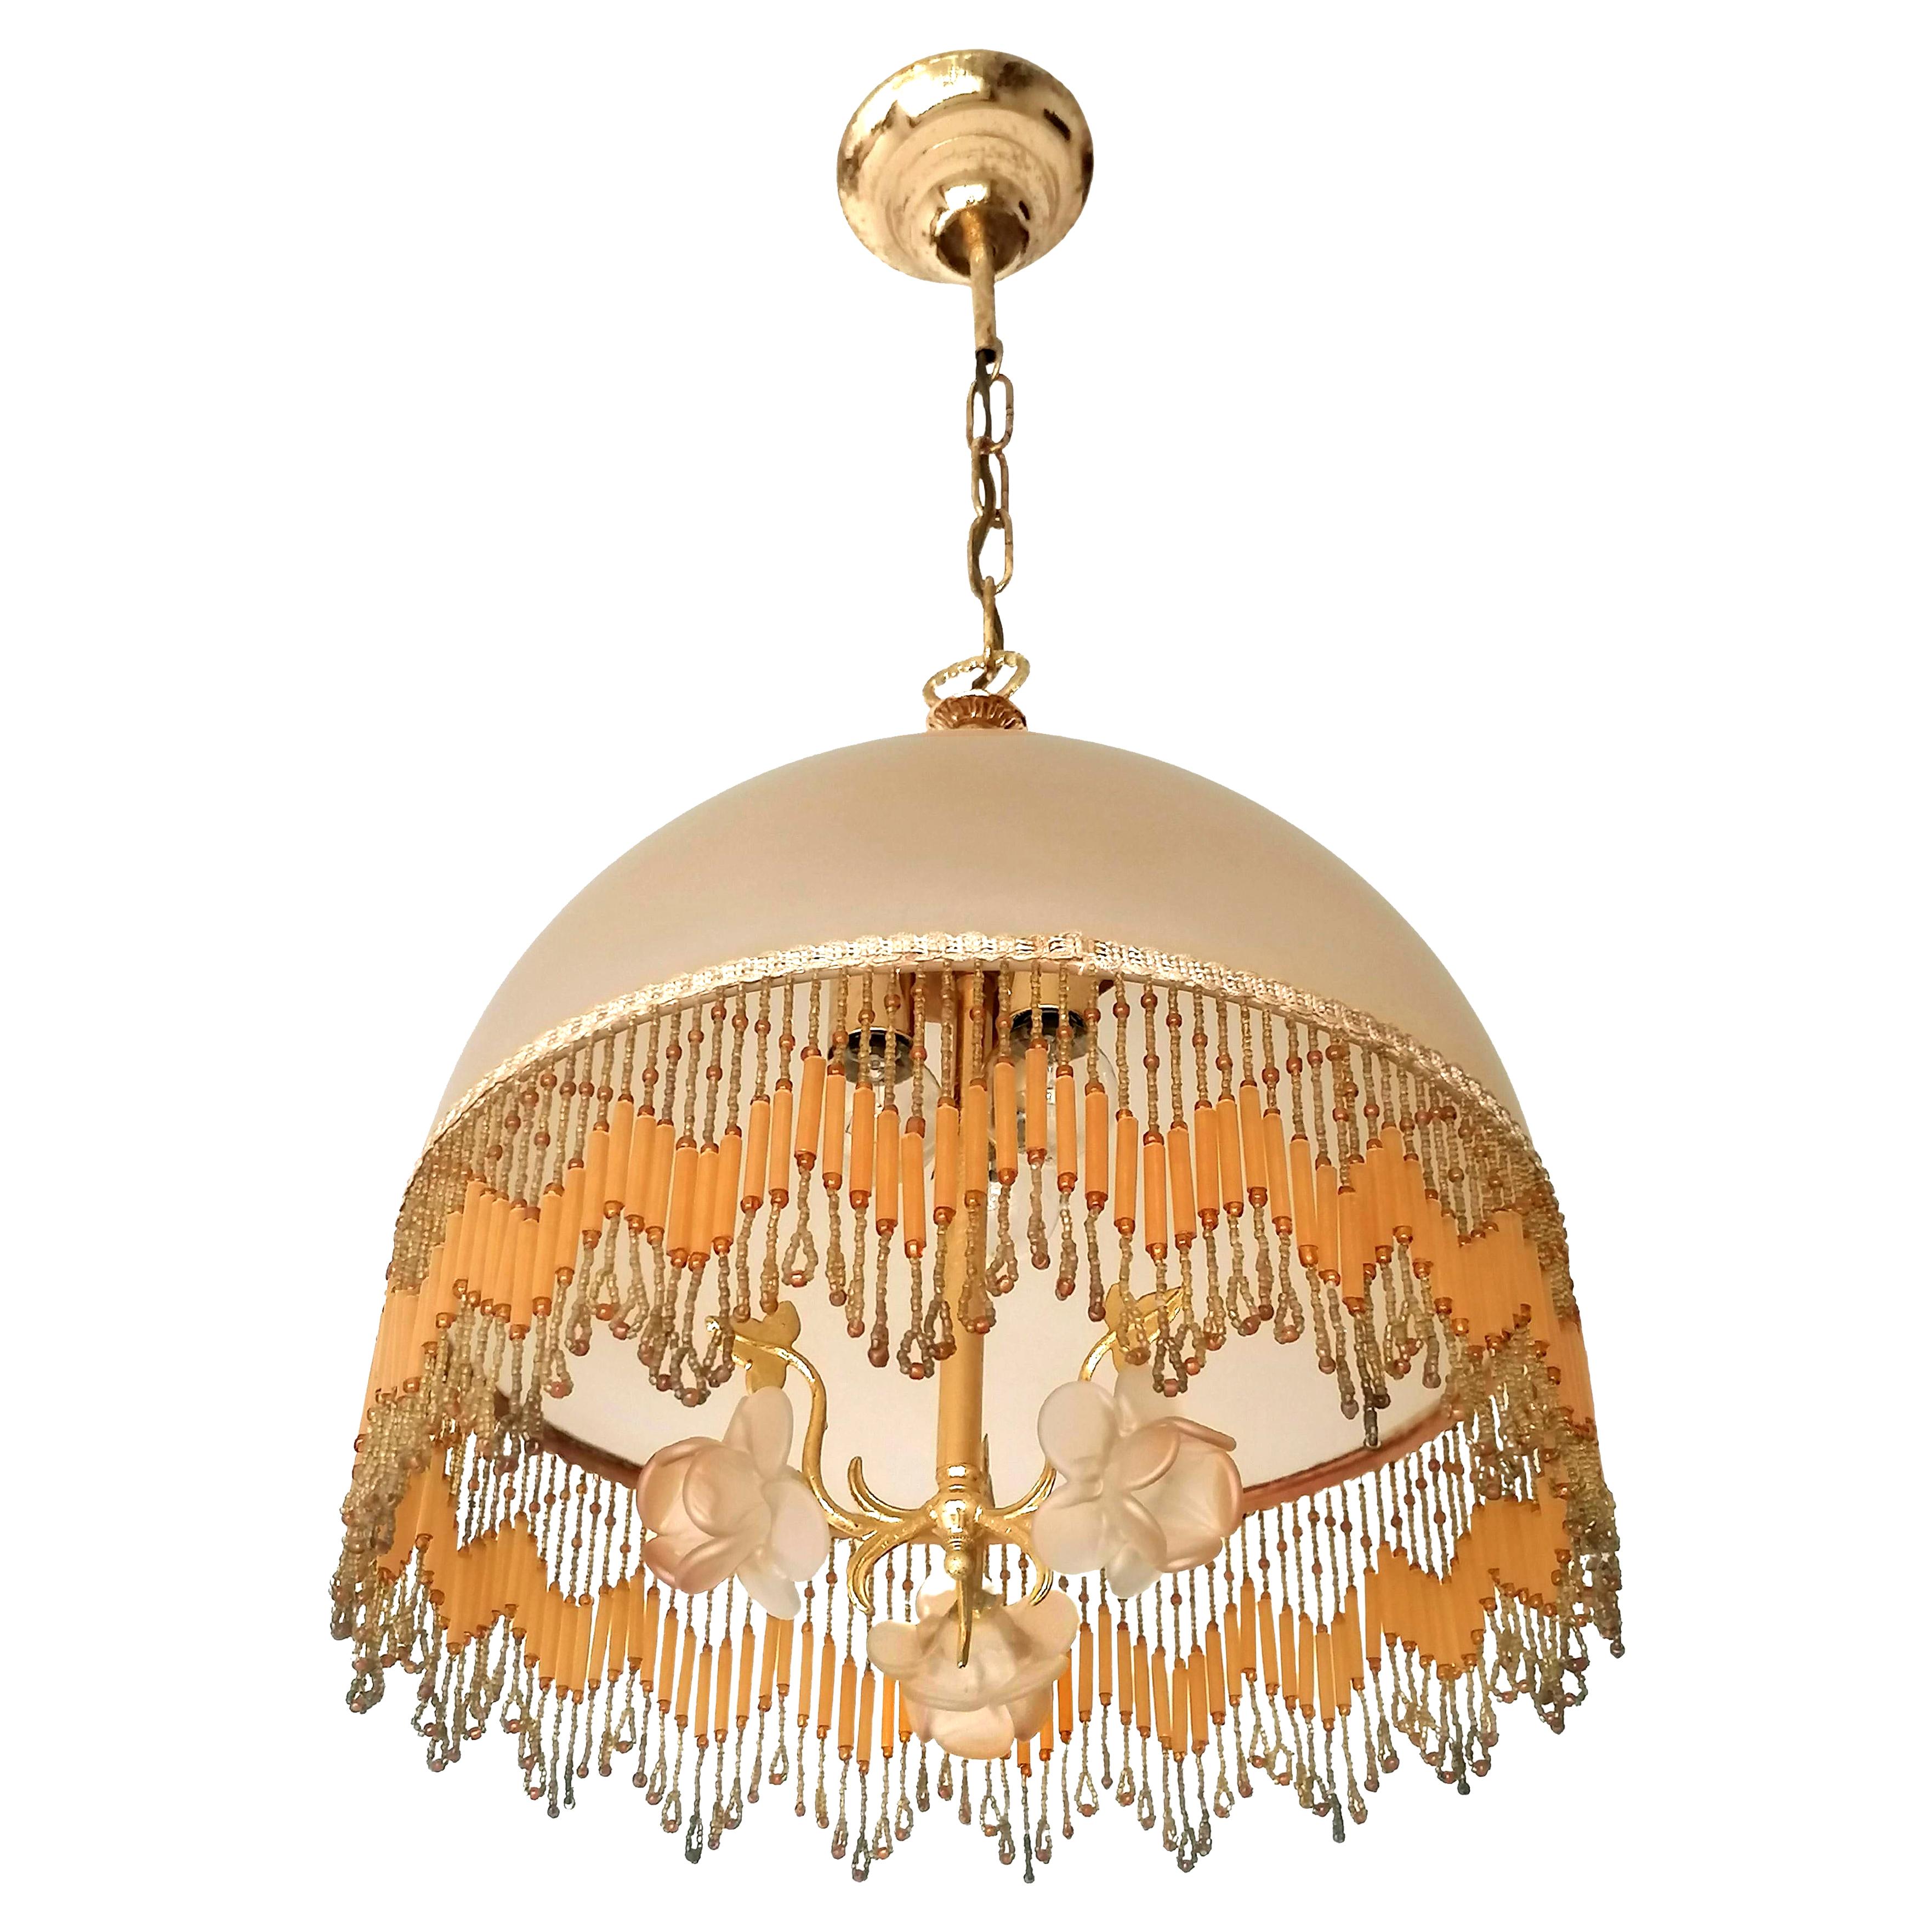 Beautiful Italian midcentury chandelier with Amber Glass Flowers & Beaded Glass Fringe in the style of Art Deco and Art Nouveau.
Dimentions:
Height 26.35 in. (chain/6 in)/ 72 cm (chain/15 cm)
Diameter 14.18 in. (36 cm)   
3-light bulbs E14/ good